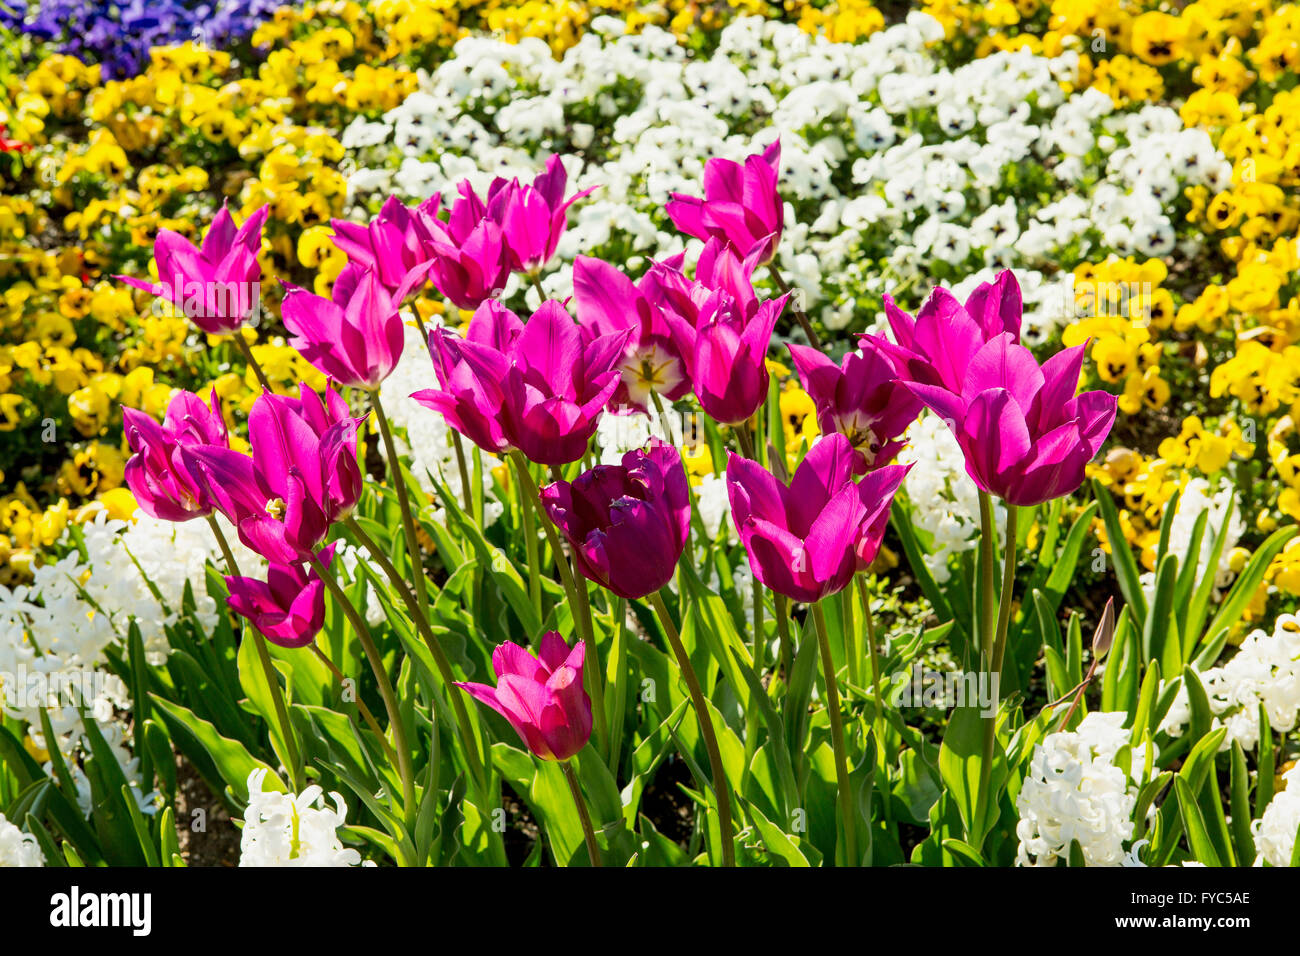 Colourful multi-colored flower bed with tulips in the foreground in the park on a sunny day Stock Photo